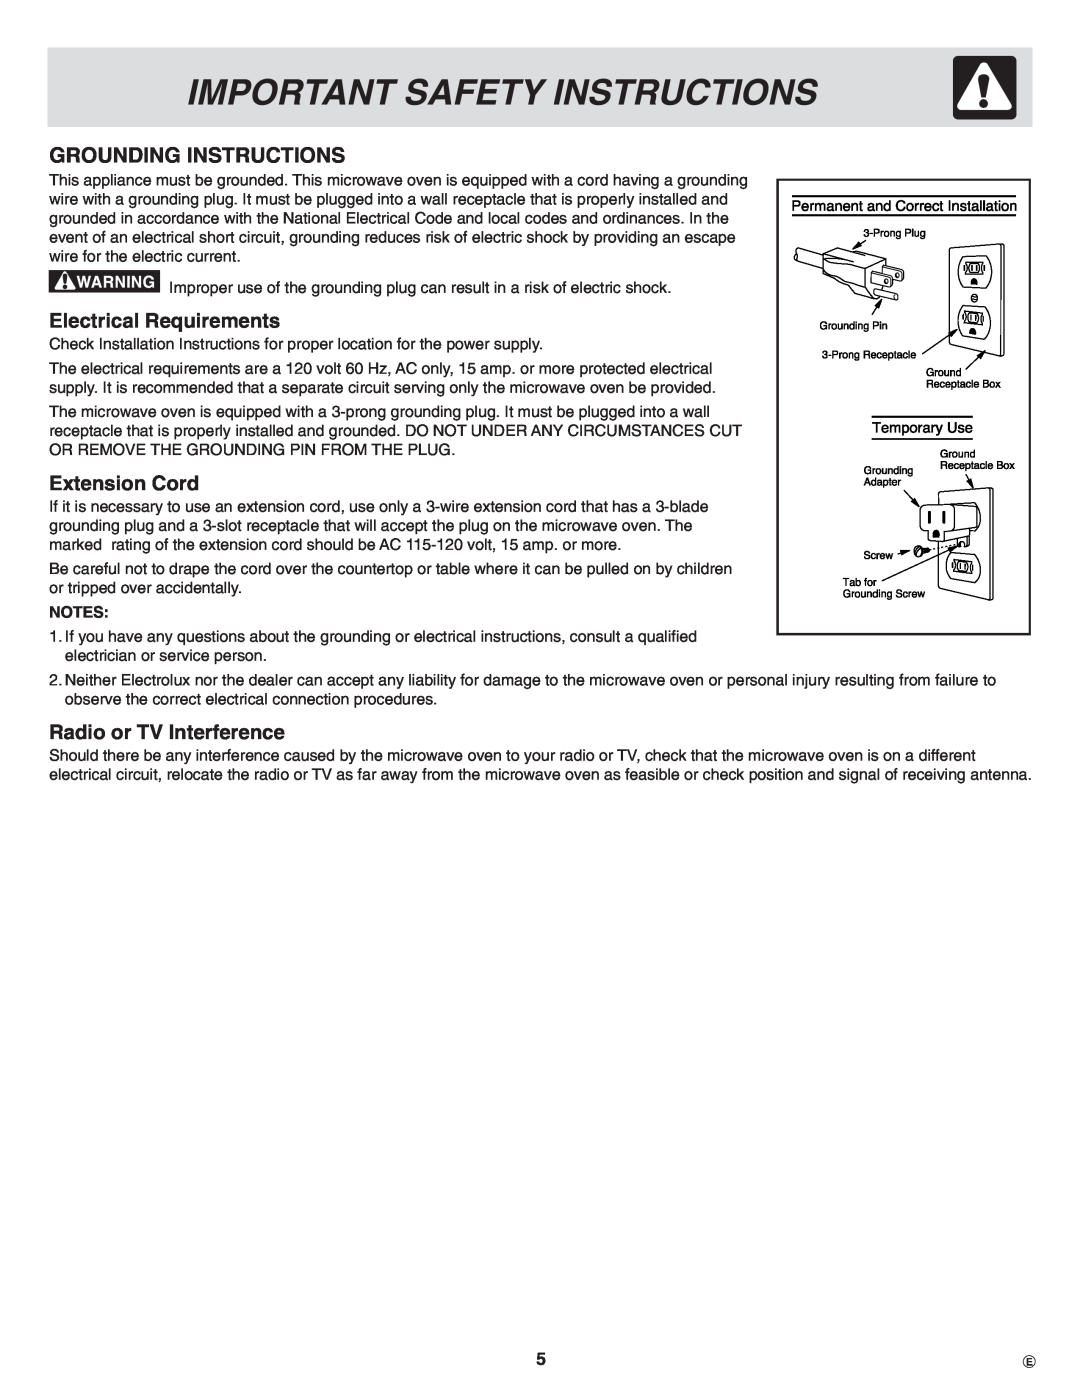 Frigidaire CPLMZ209, PLMBZ209 Grounding Instructions, Electrical Requirements, Extension Cord, Radio or TV Interference 